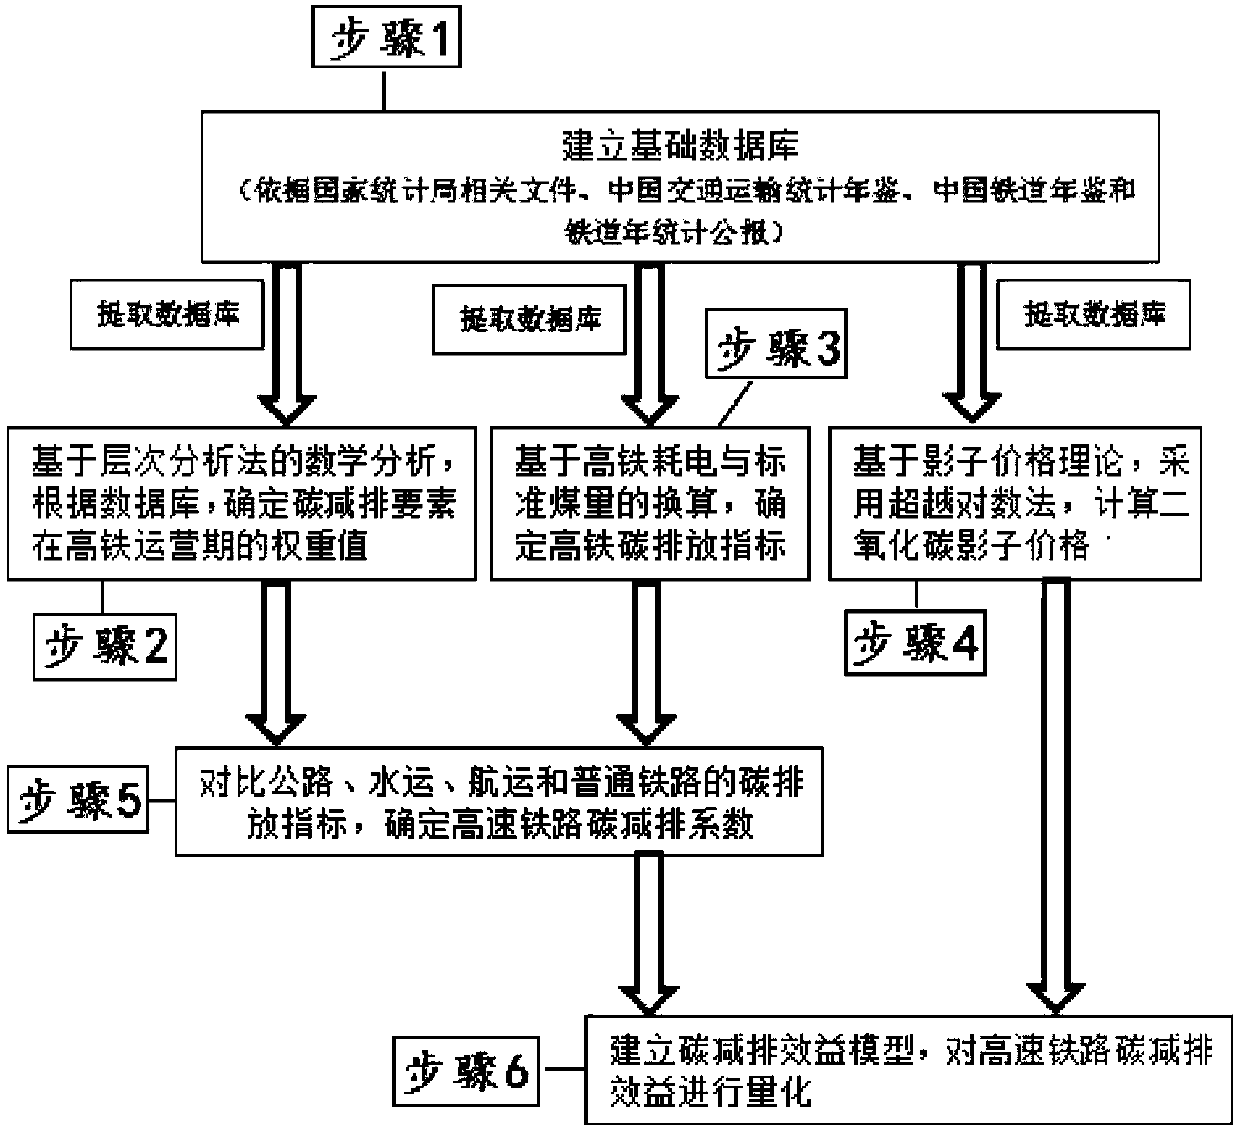 Environmental benefit calculation method for carbon emission reduction in high-speed railway operation period